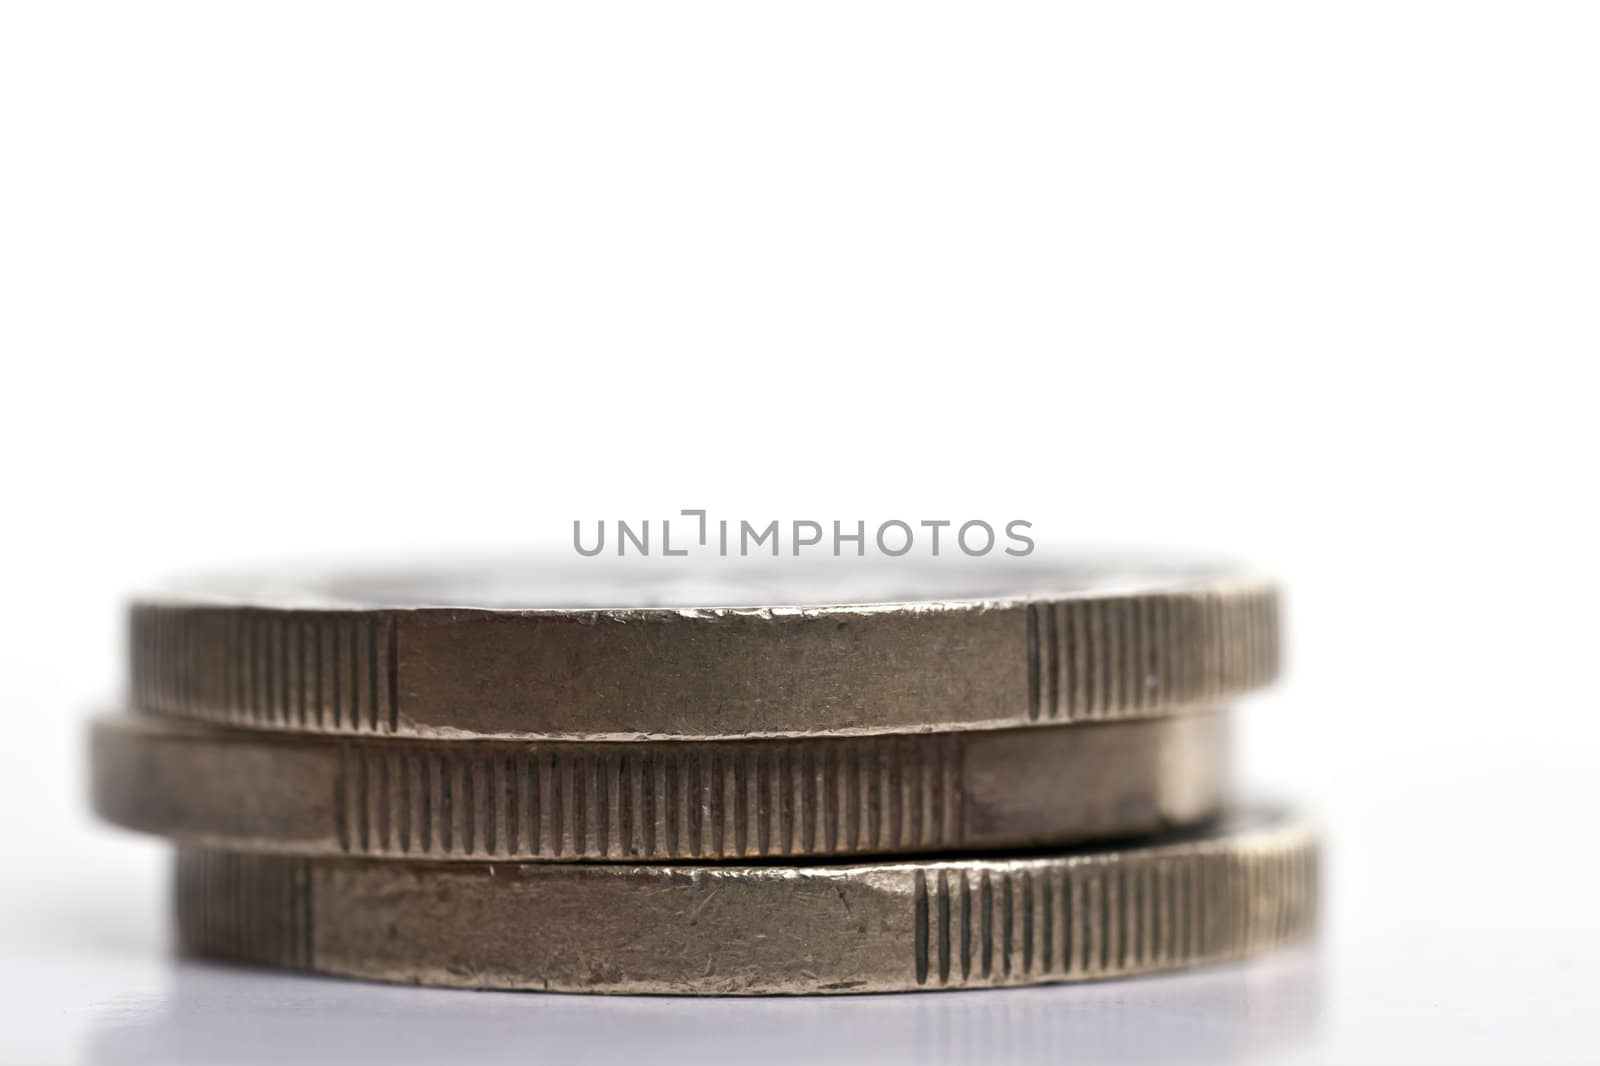 Stack of three 1 Euro coins over a plain background